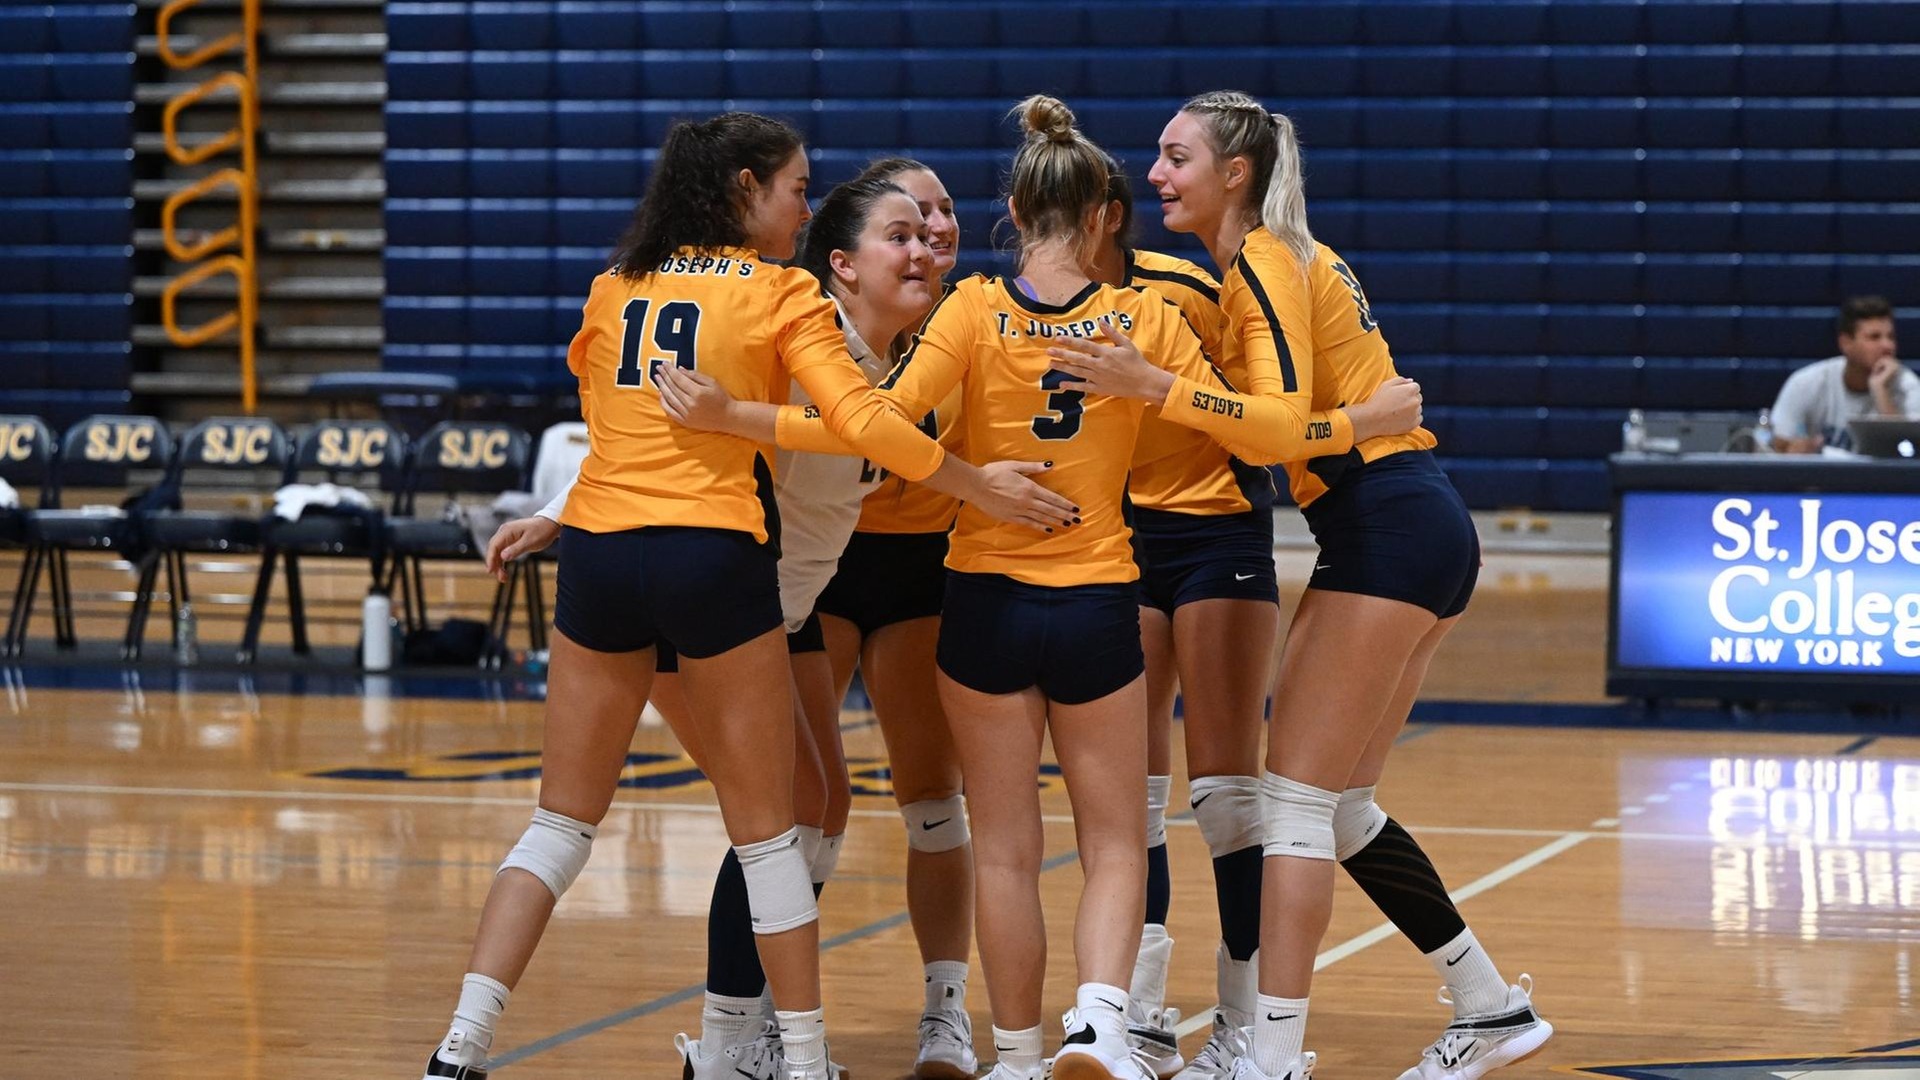 Women's Volleyball Takes Down John Jay, 3-1